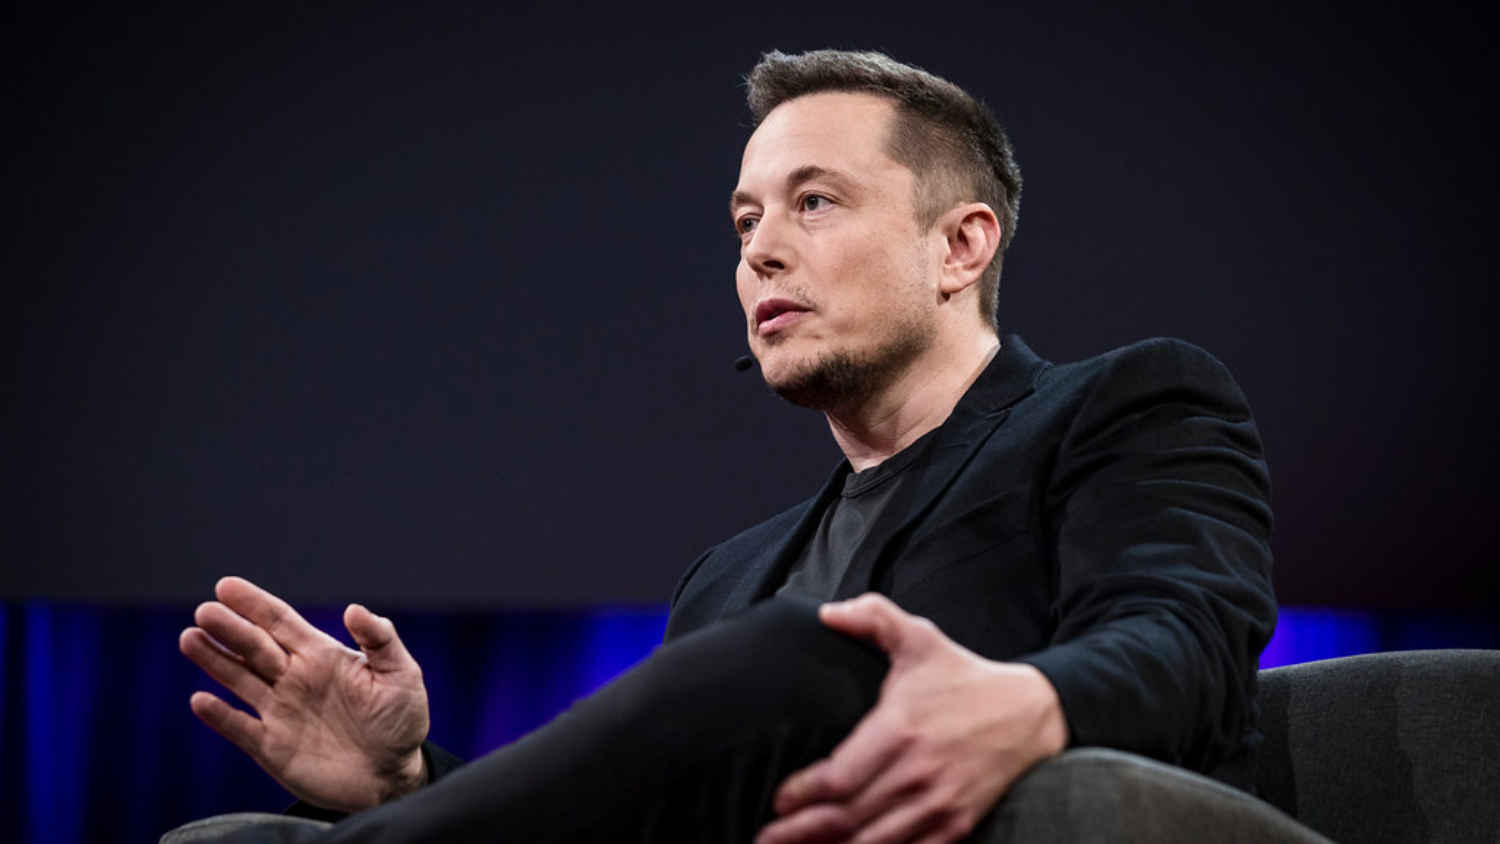 Will AI ever surpass humans? Here’s what Elon Musk thinks